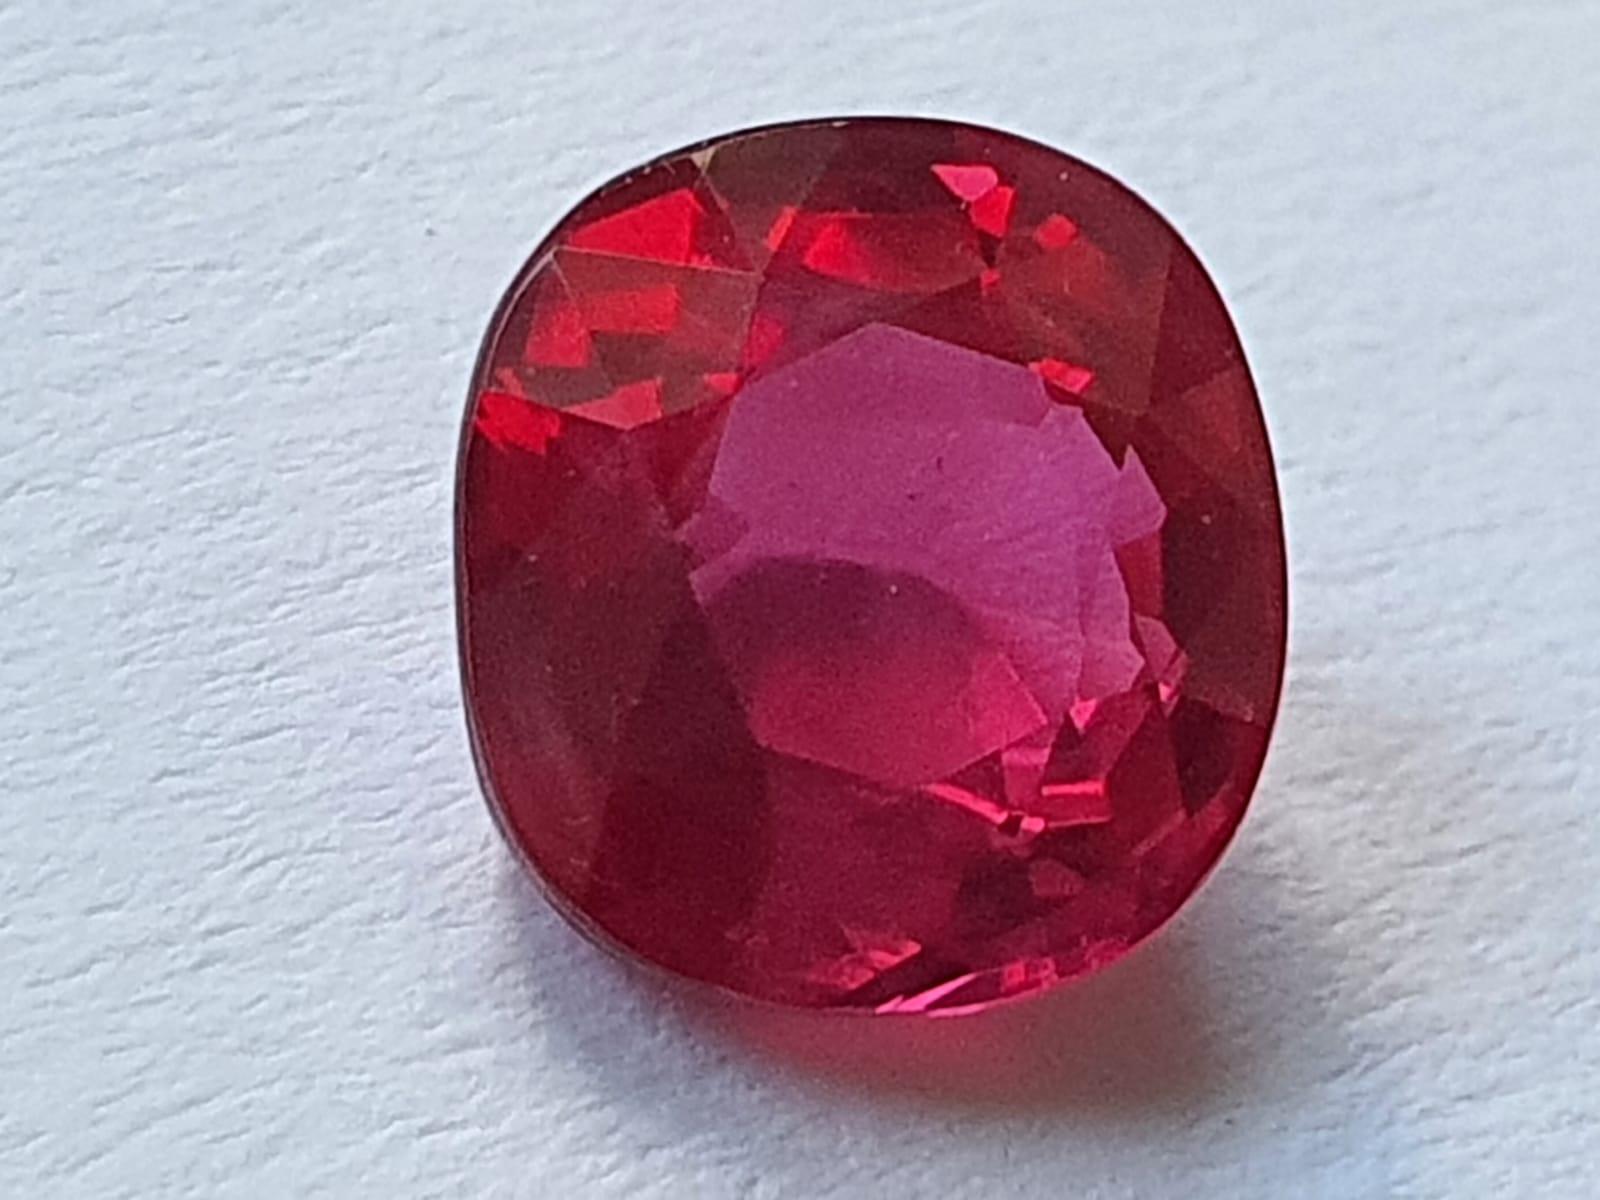 An exceptional 2.05ct Pigeon's Blood Red unheated Burmese Ruby. 

The qualities possessed in this beautiful gemstone are extremely rare for a stone of this size. 

Displaying a rich, pinkish red color hue, typical of Burmese Rubies, as well as a